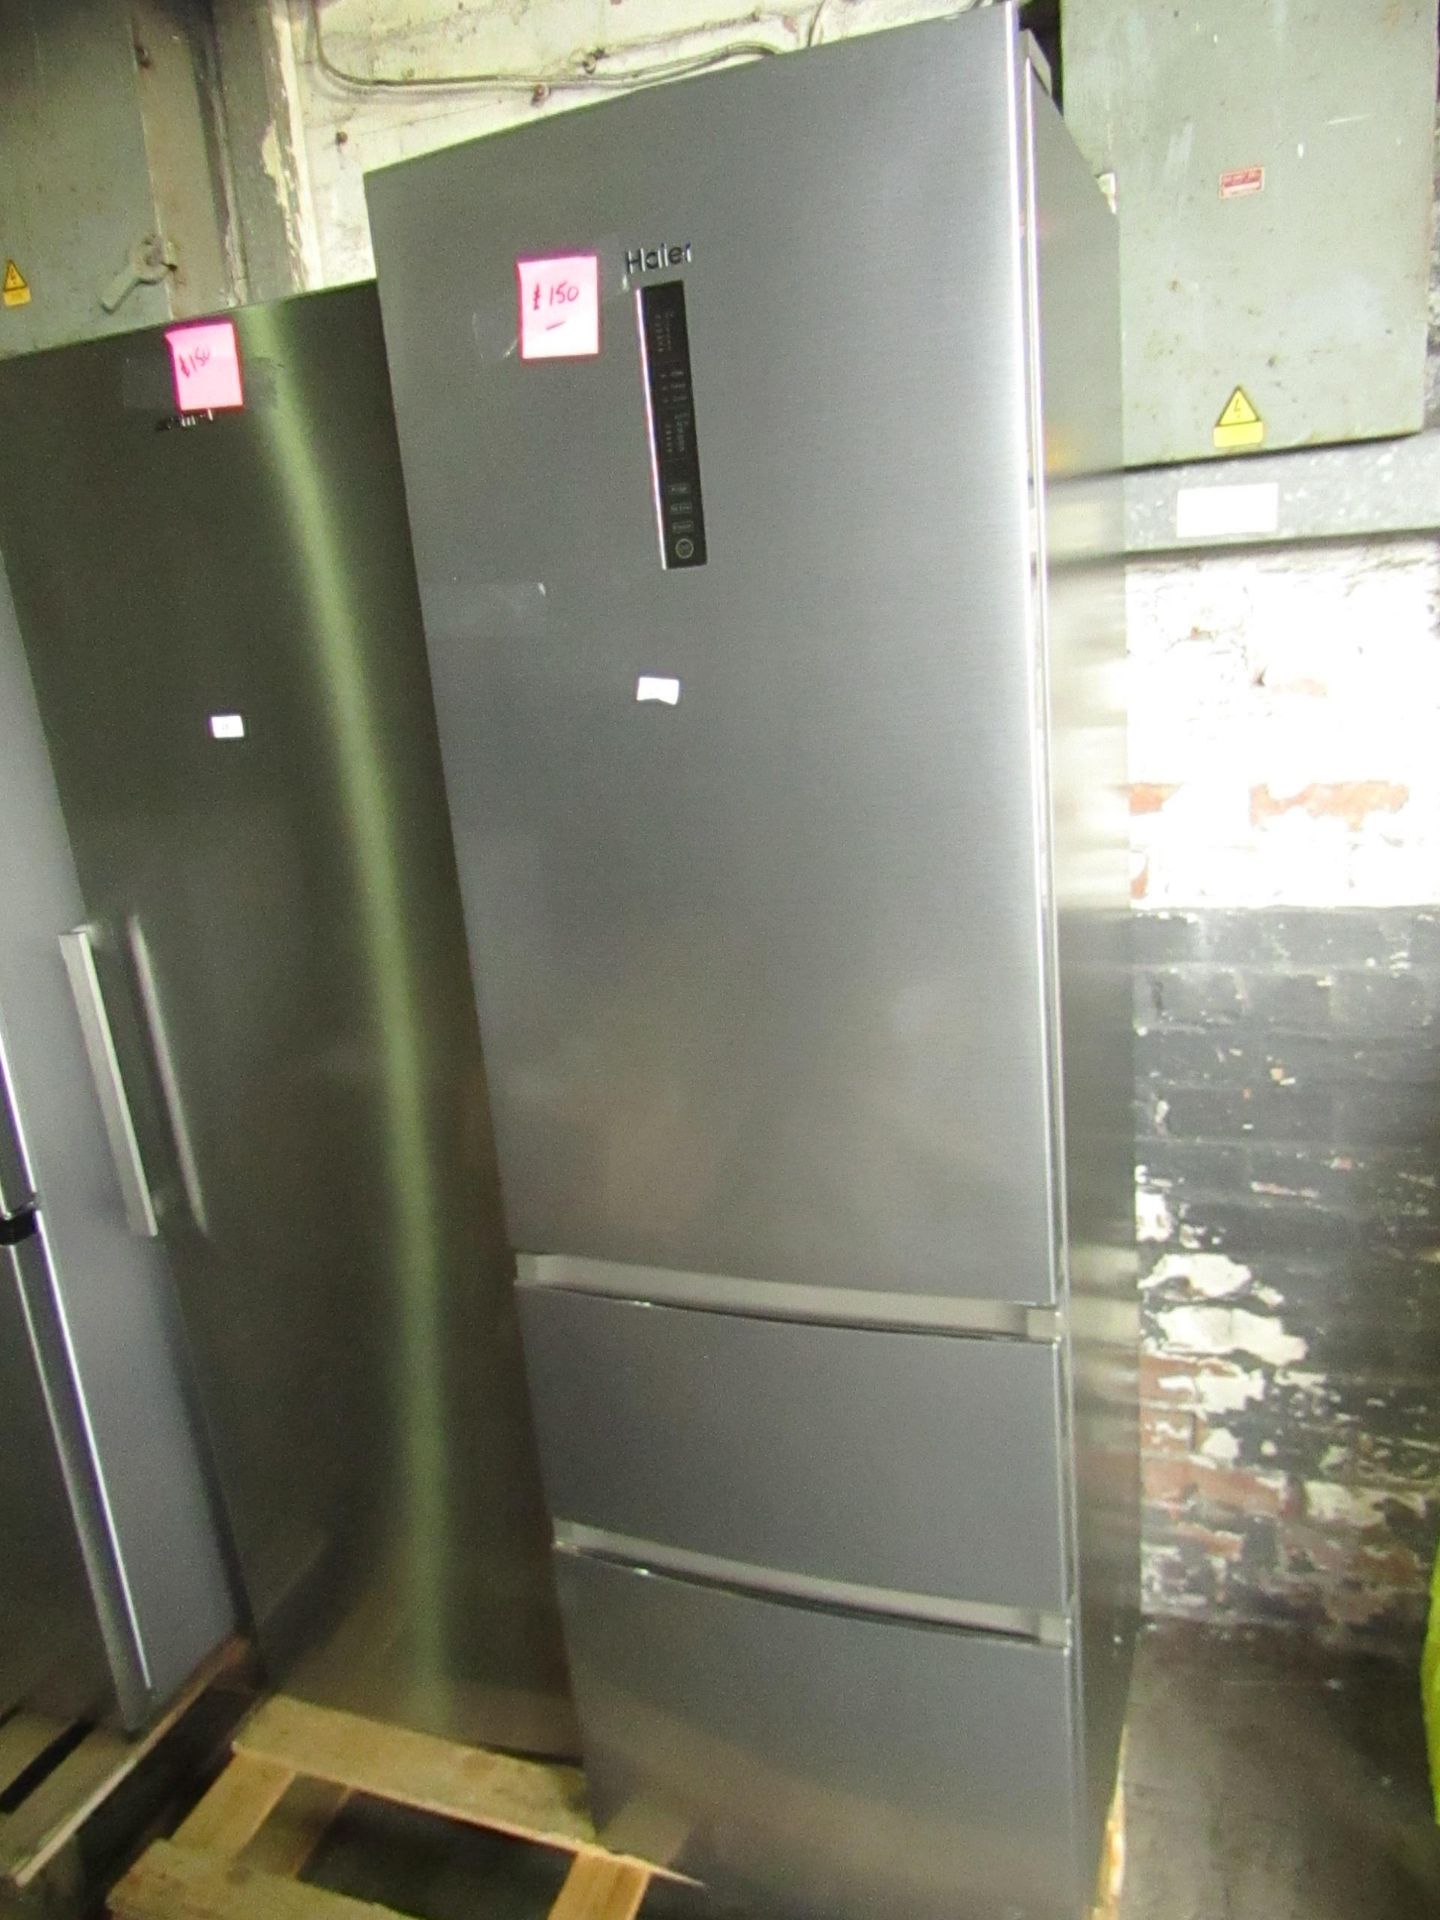 Haier Fridge Freezer, Stainless Steel, Unable To Test Due To A Damaged Plug. RRP 589.